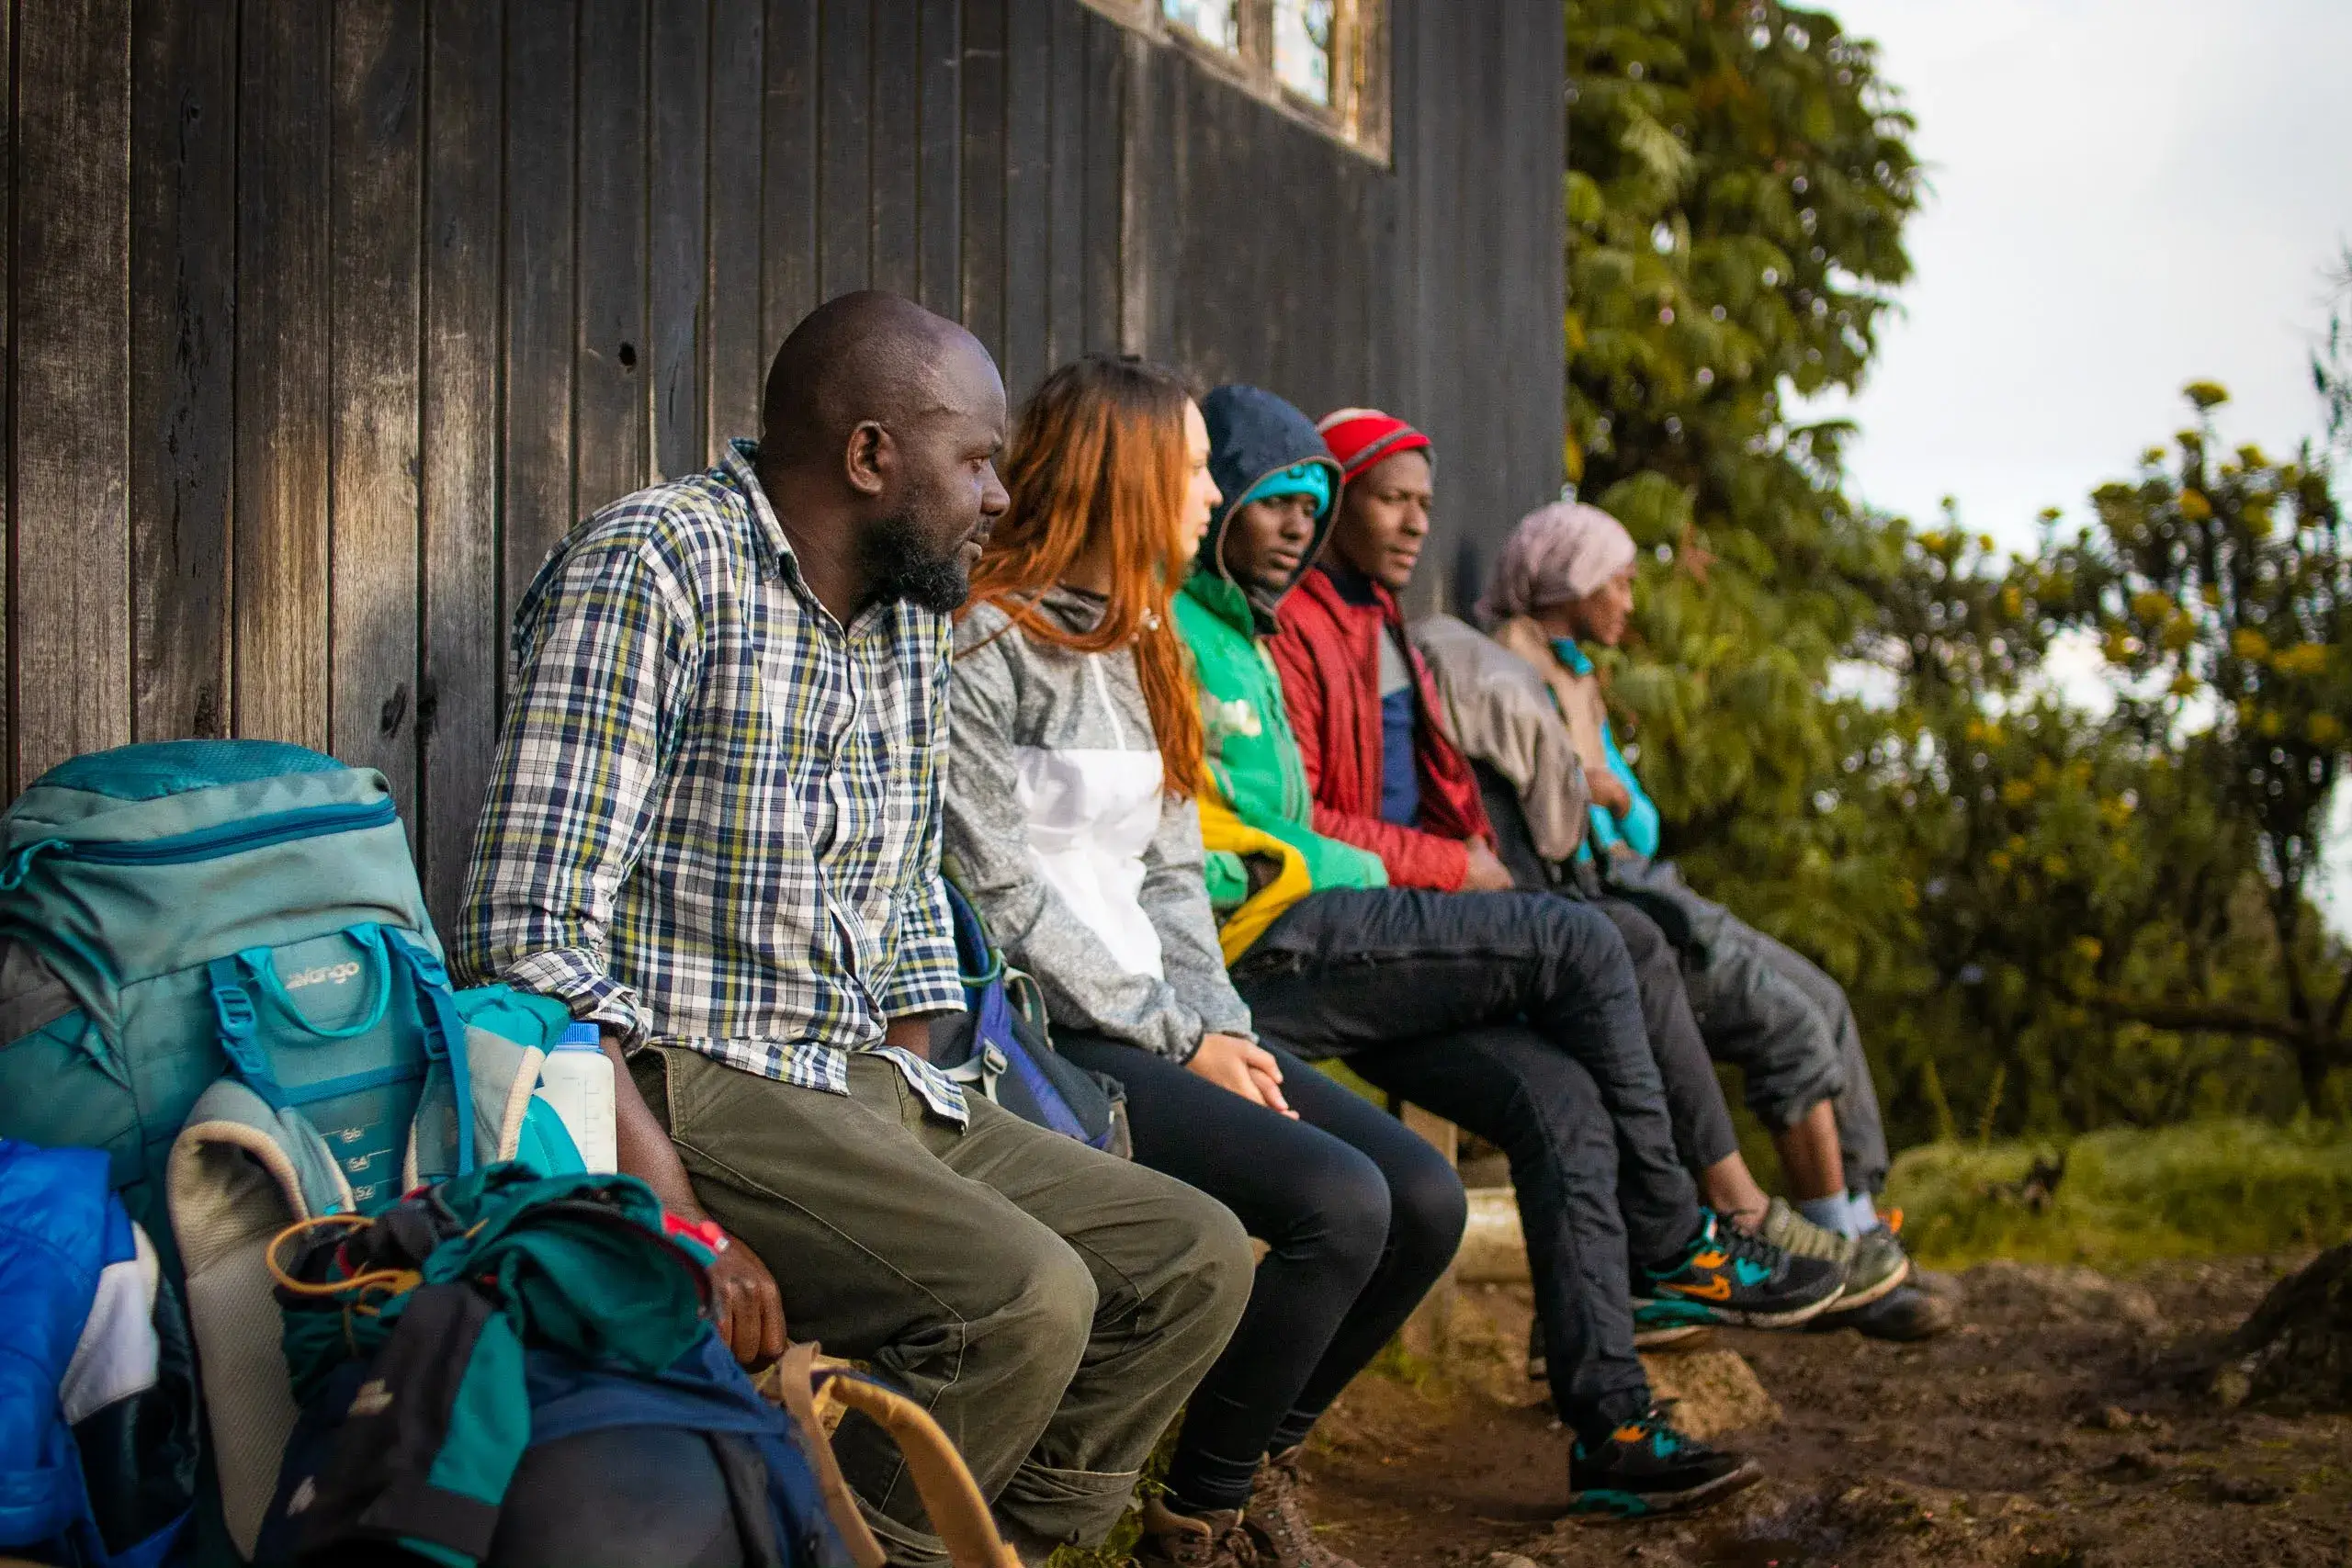 Our travelers, who are a group of friends posing for a picture while trekking Kilimanjaro